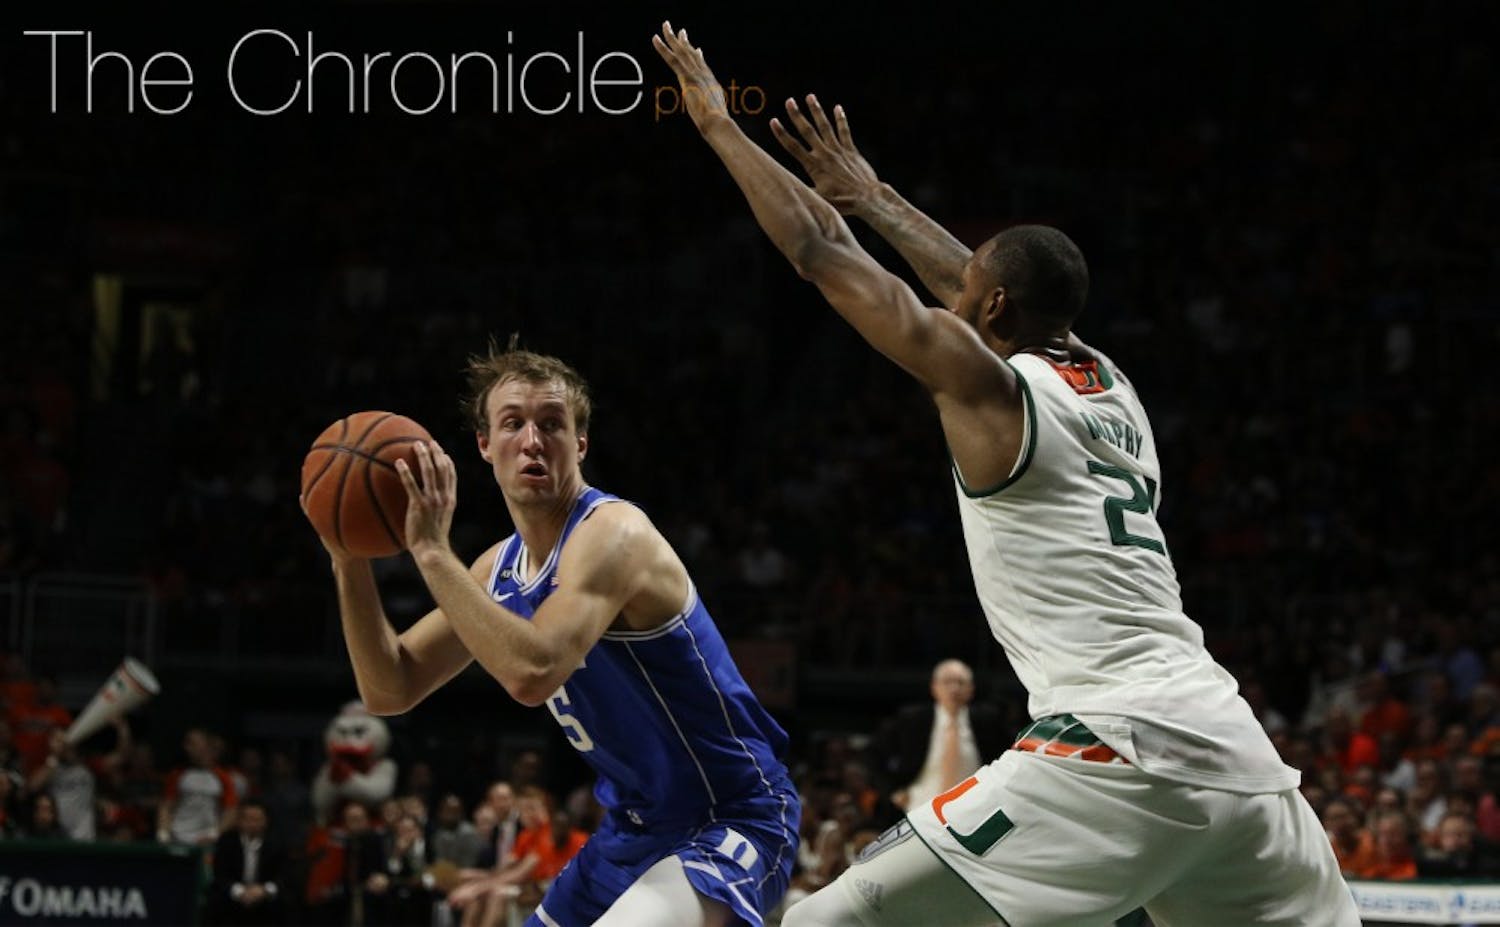 Luke Kennard earned second-team All-American honors after a breakthrough season as the second-leading scorer in the ACC.